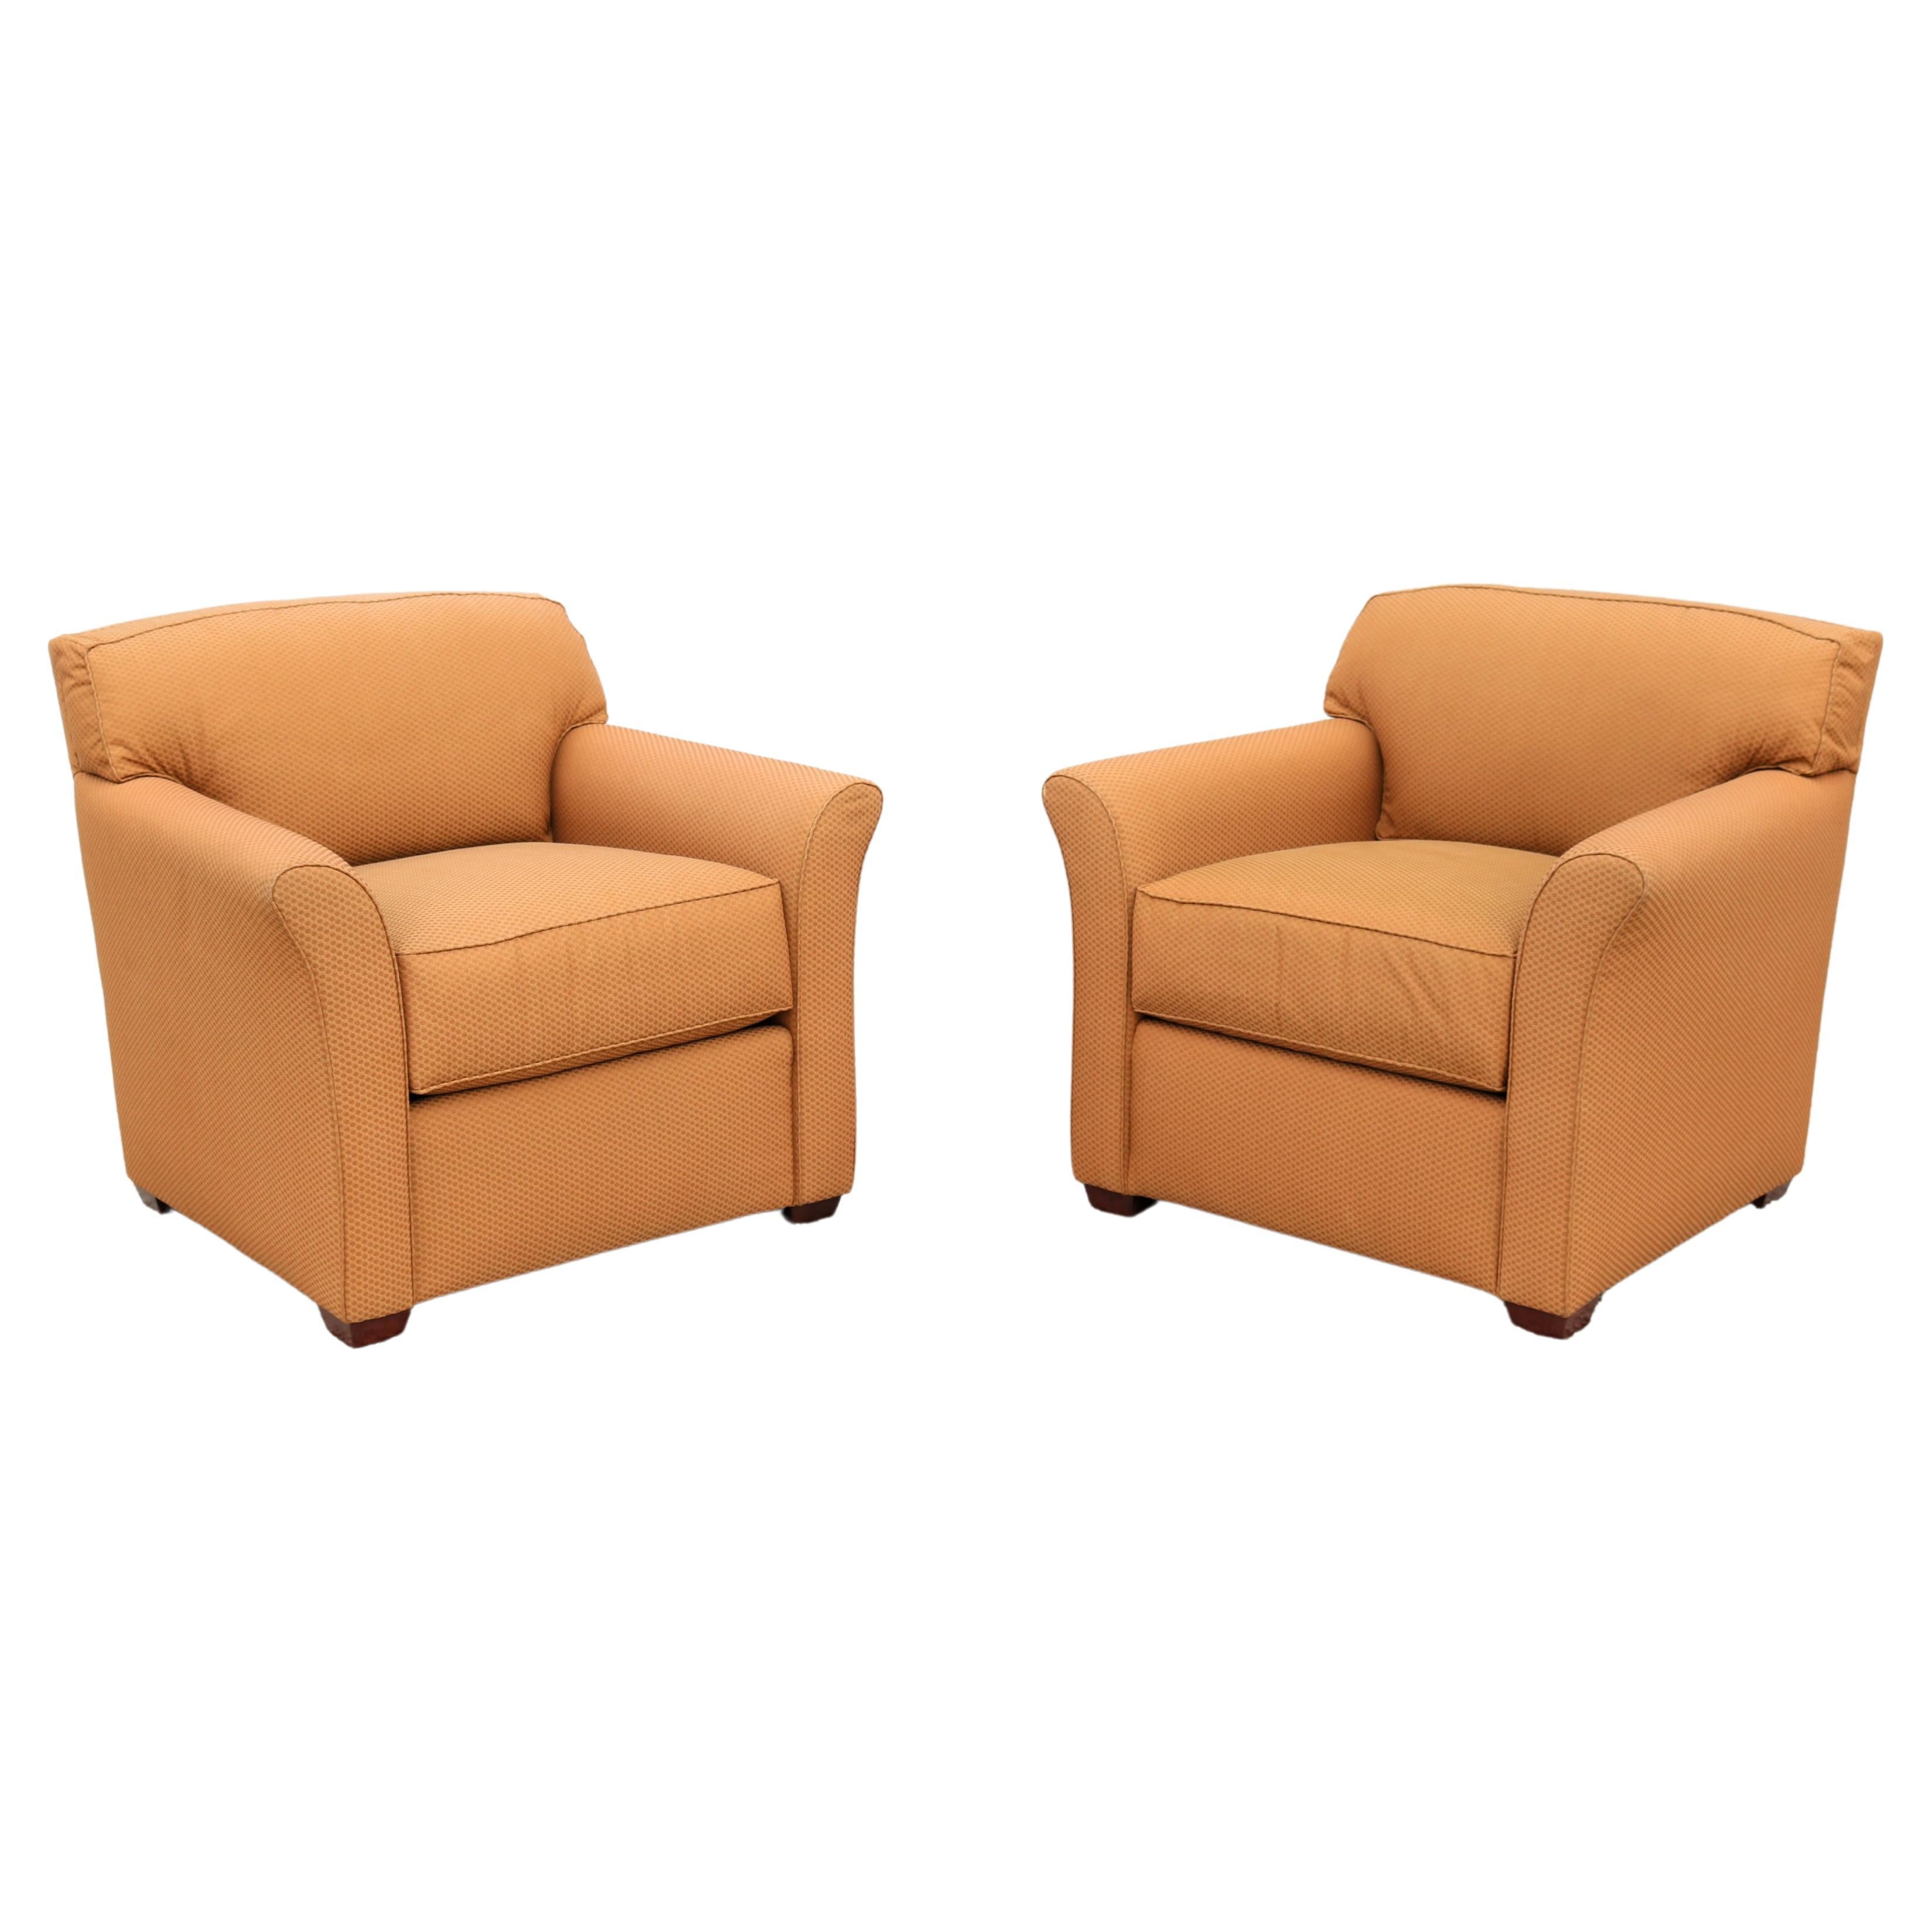 Bernhardt Lawson American Casual Style Lounge Chairs Very Comfortable, a Pair